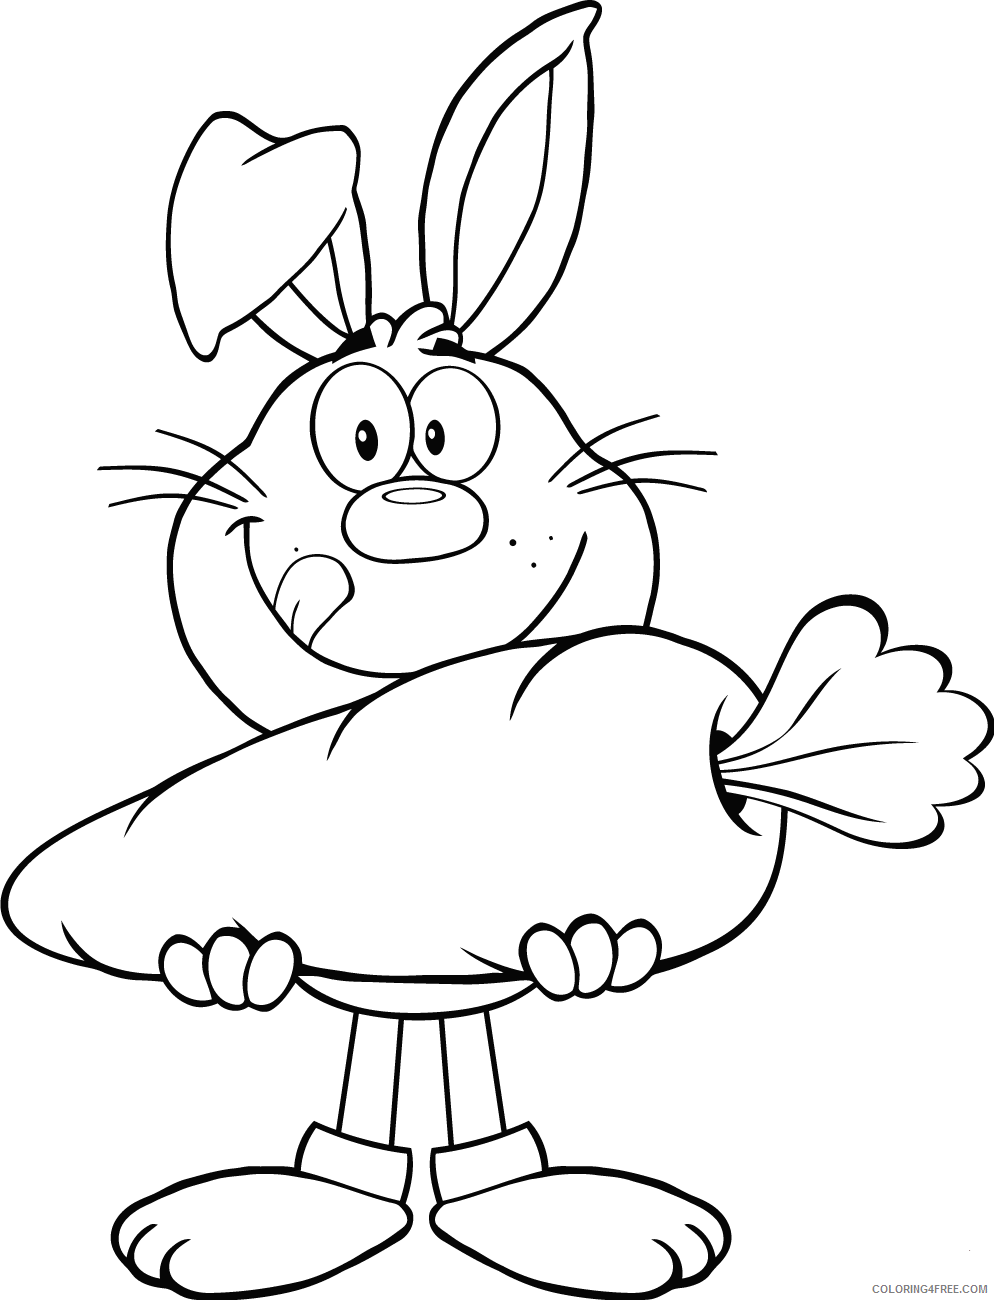 Carrot Coloring Pages Vegetables Food hungry rabbit holding a big carrot 2021 516 Coloring4free